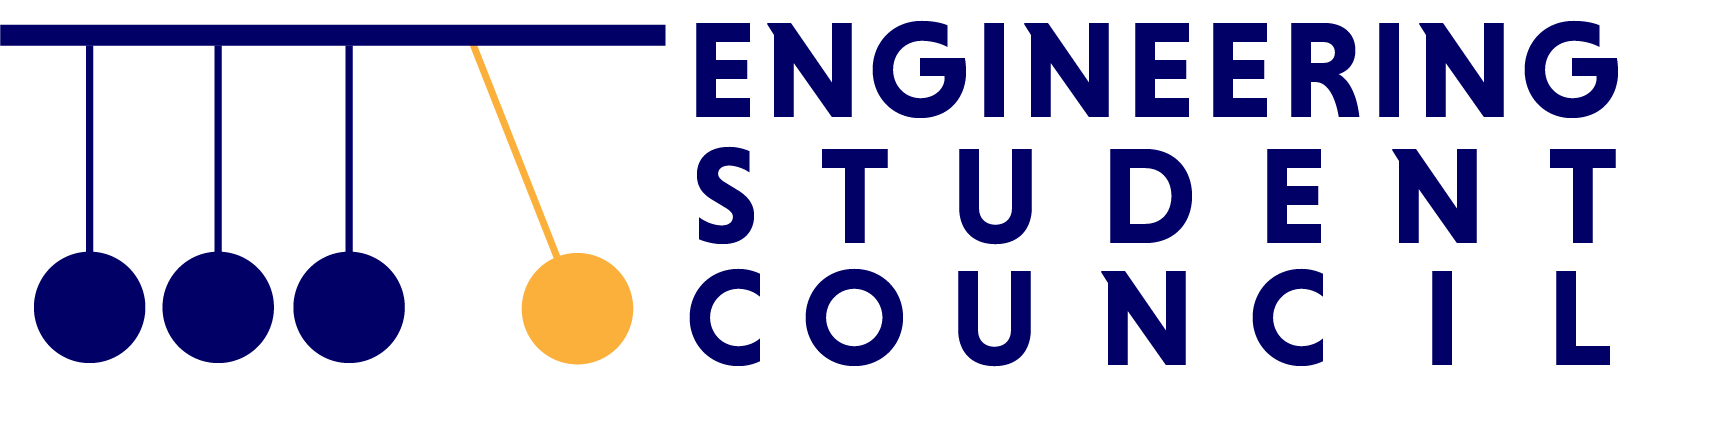 Engineering Student Council Logo